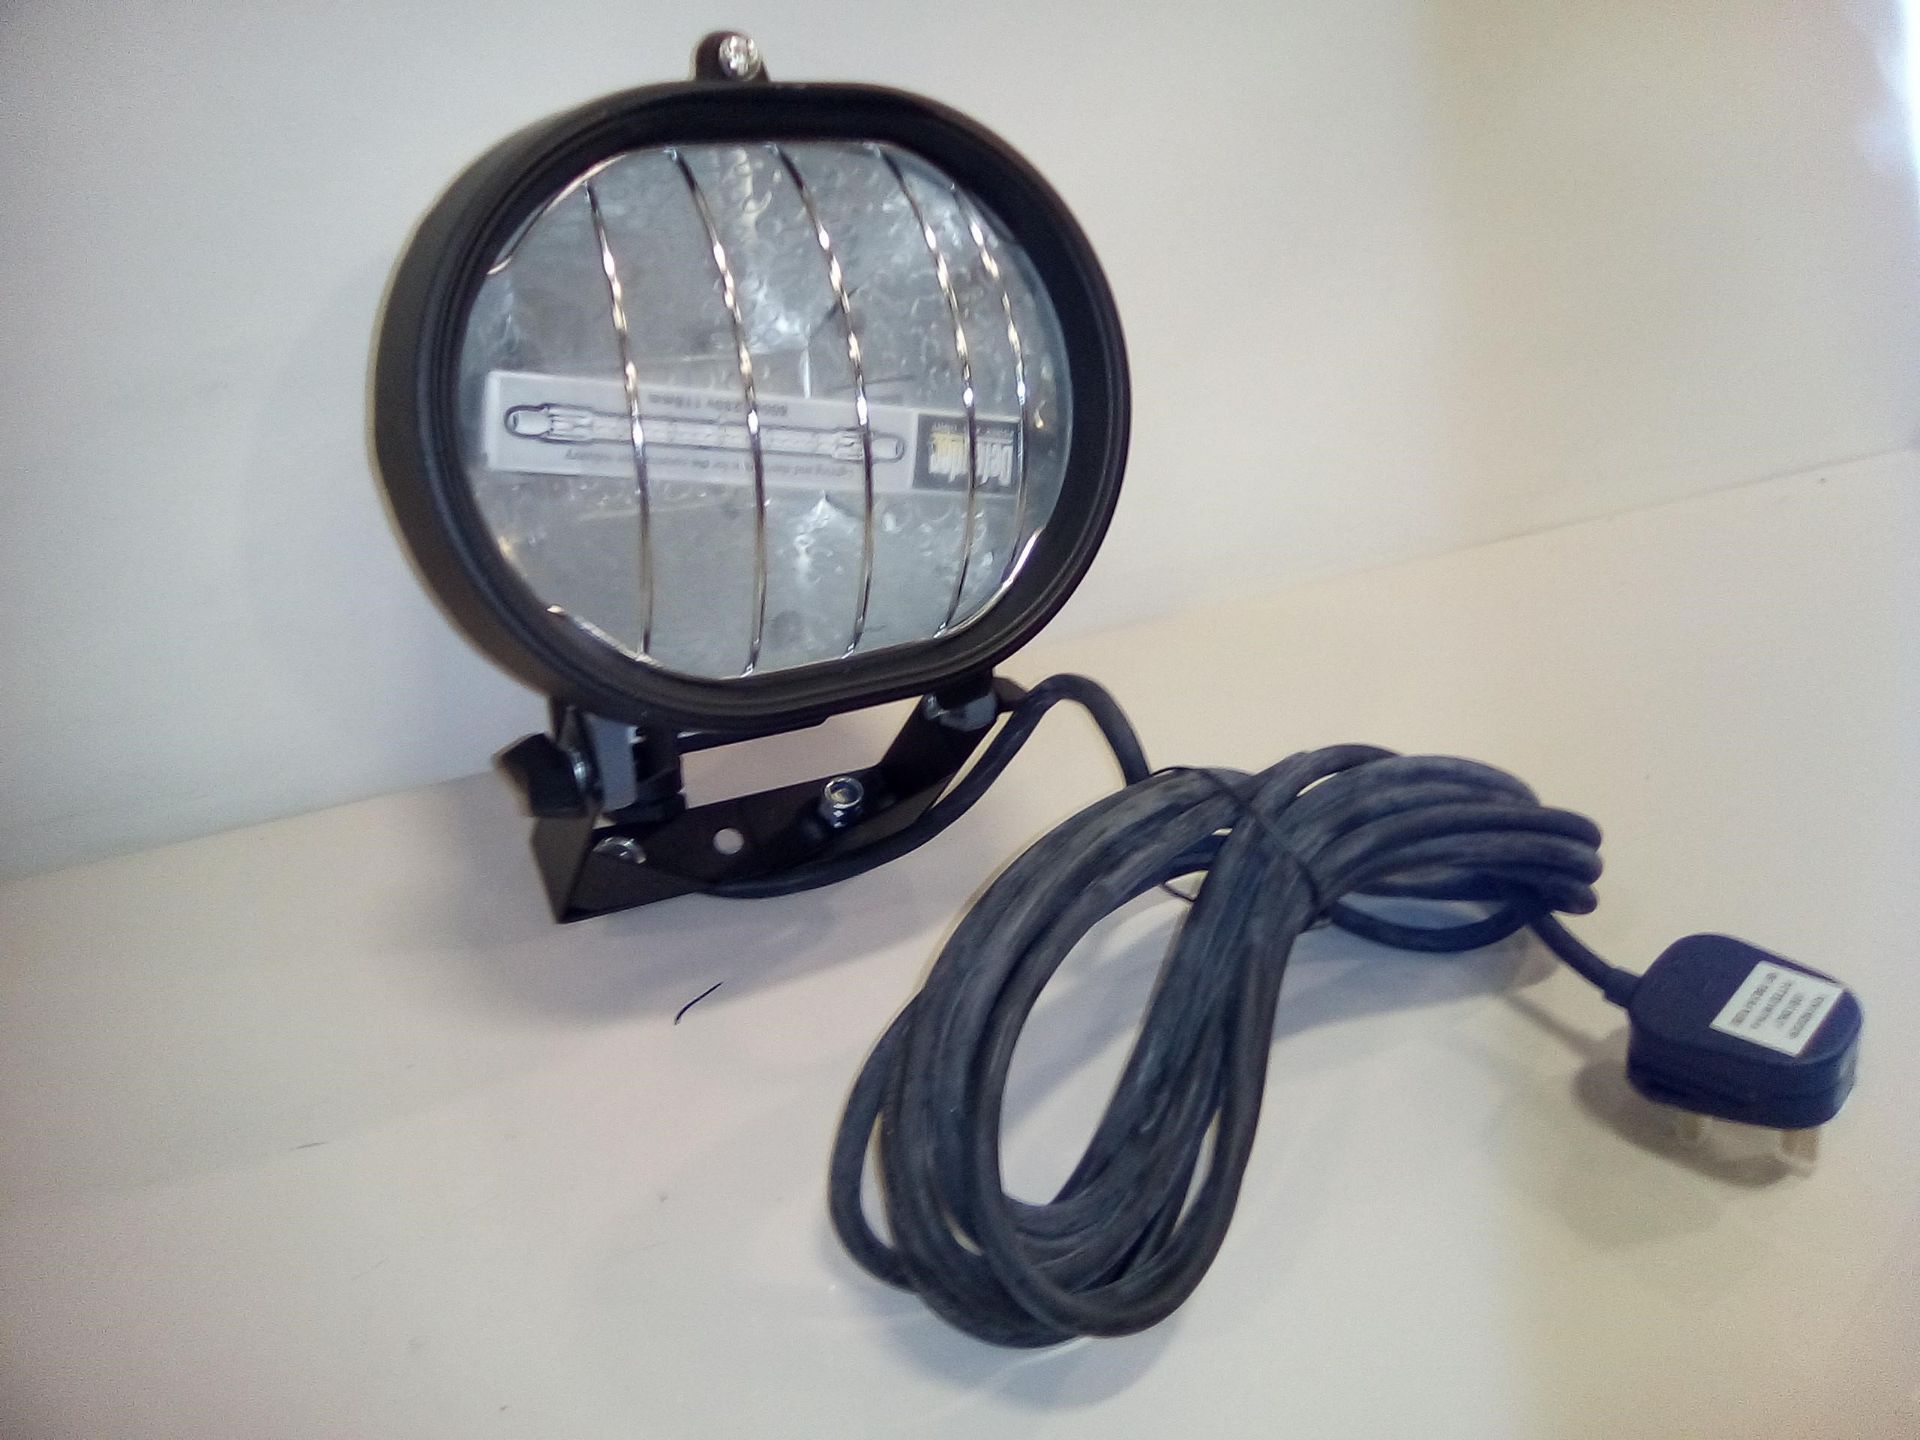 20 X BRAND NEW DEFENDER 230 / 240V HALOGEN HEAD PORTABLE SITE LAMPS / WORKLIGHTS WITH 5M CABLE,